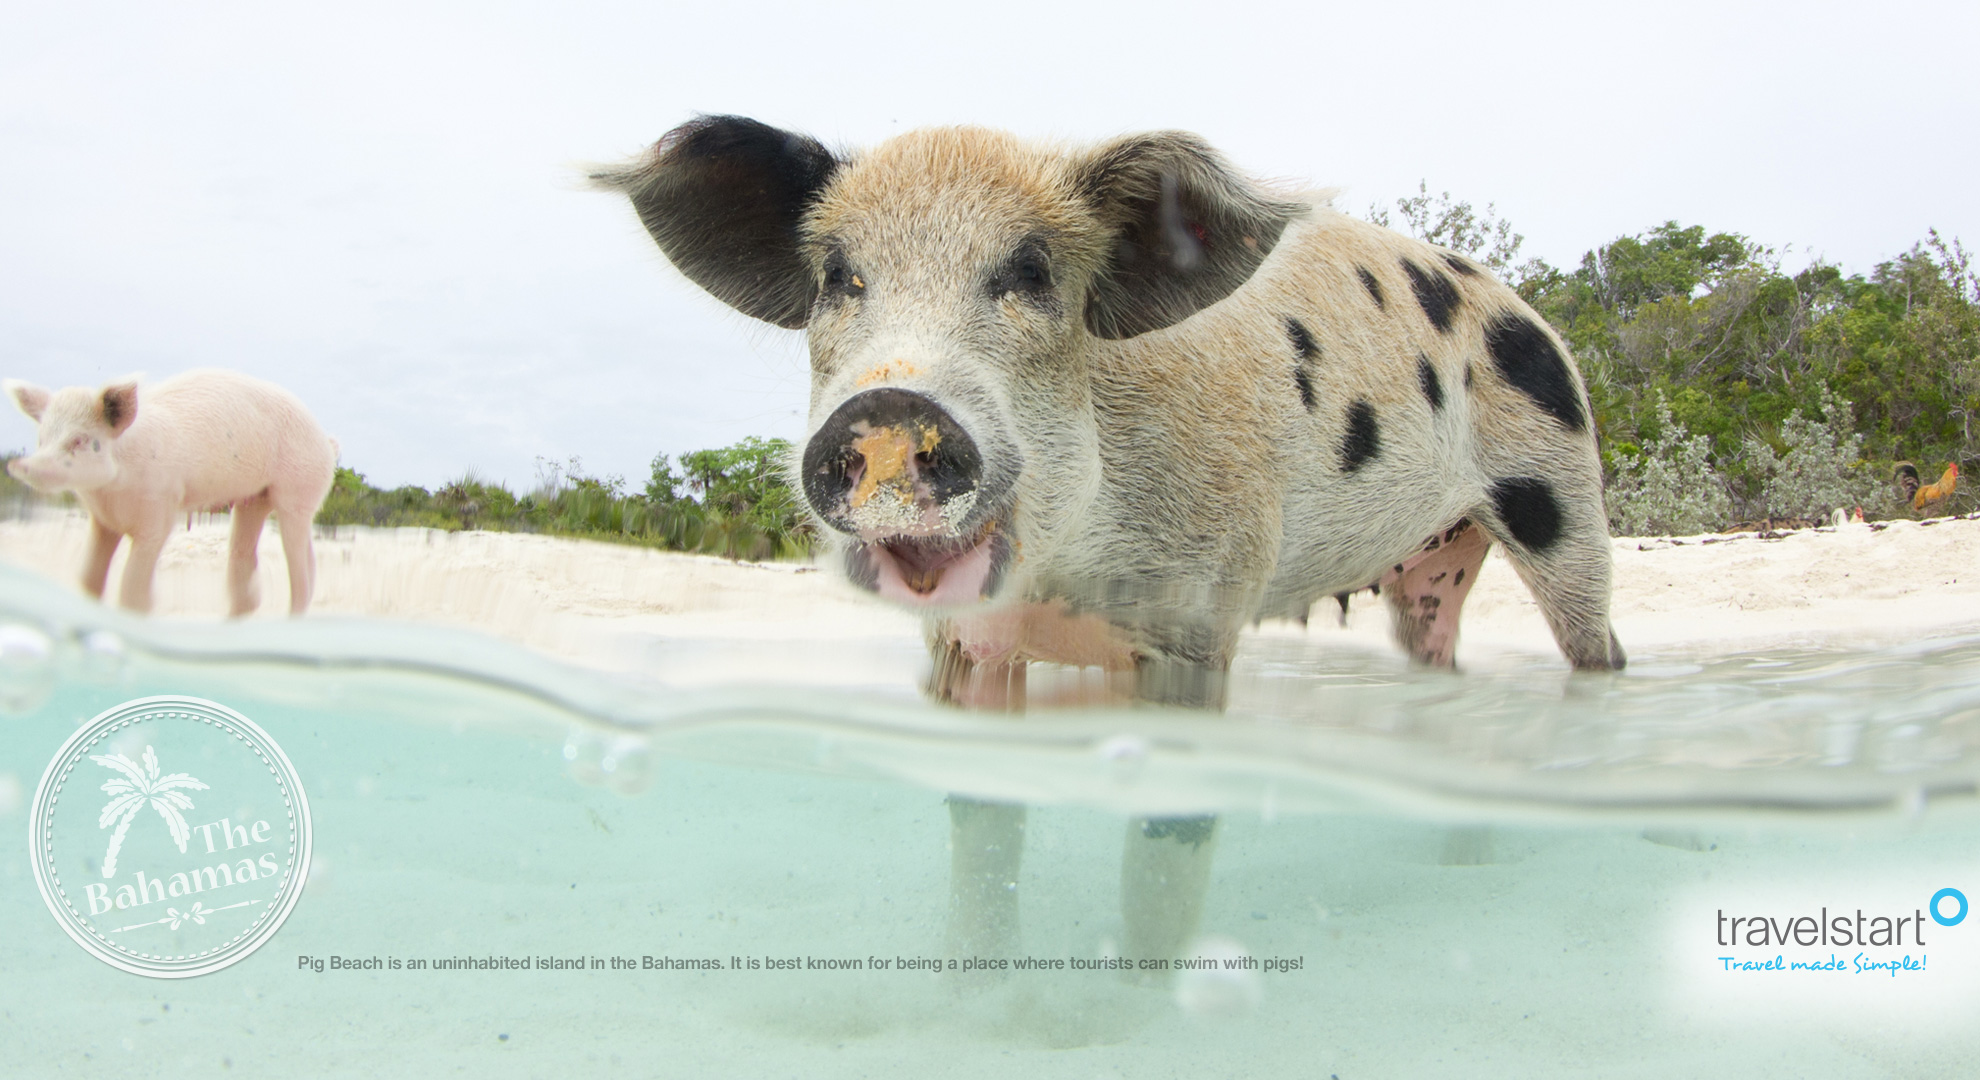 Download your free May 2014 wallpaper calendar featuring the swimming pigs of The Bahamas.